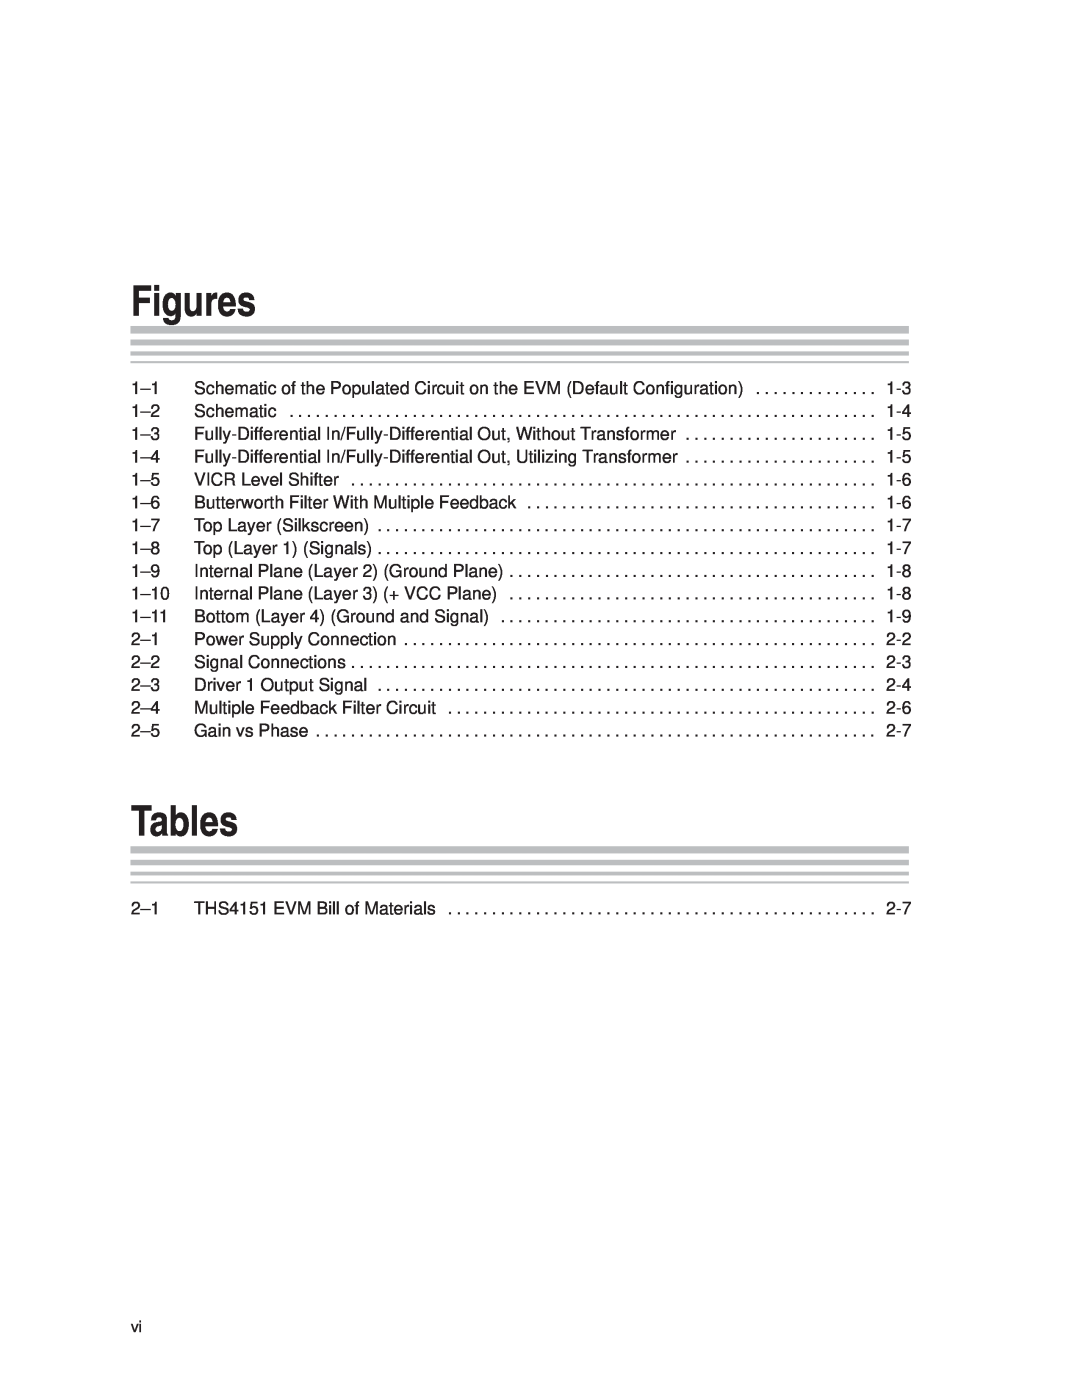 Texas Instruments THS4151 manual Figures, Tables 